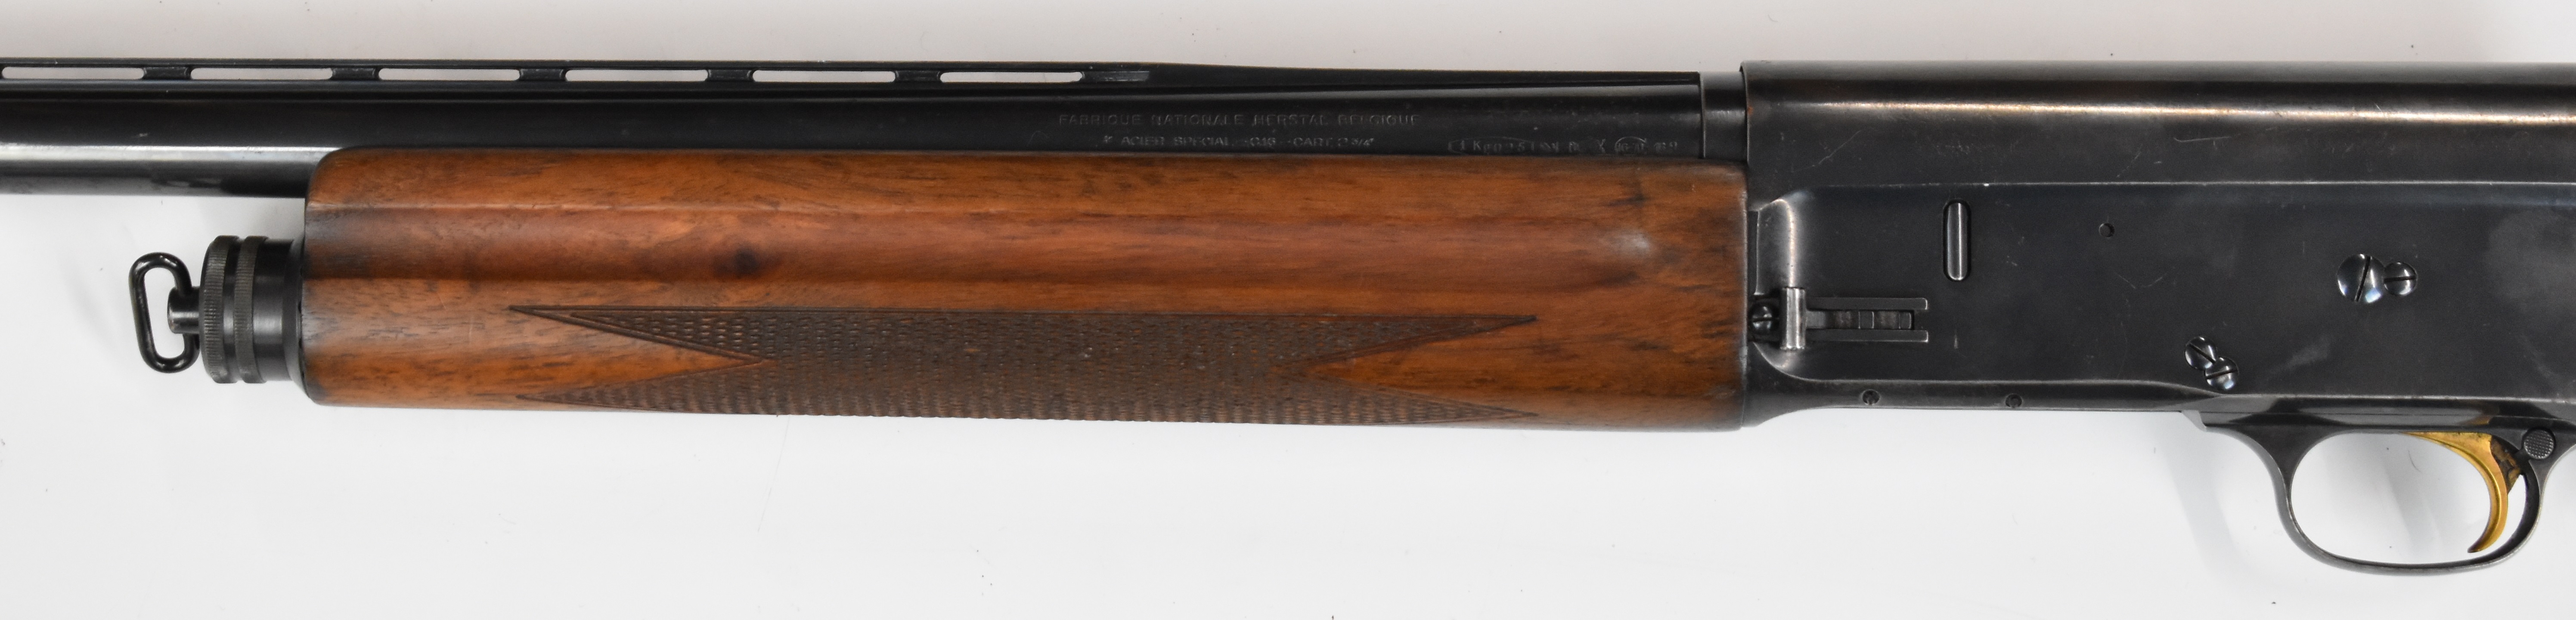 Browning 16 bore 3-shot semi-automatic shotgun with chequered semi-pistol grip and forend and 27 - Image 6 of 18